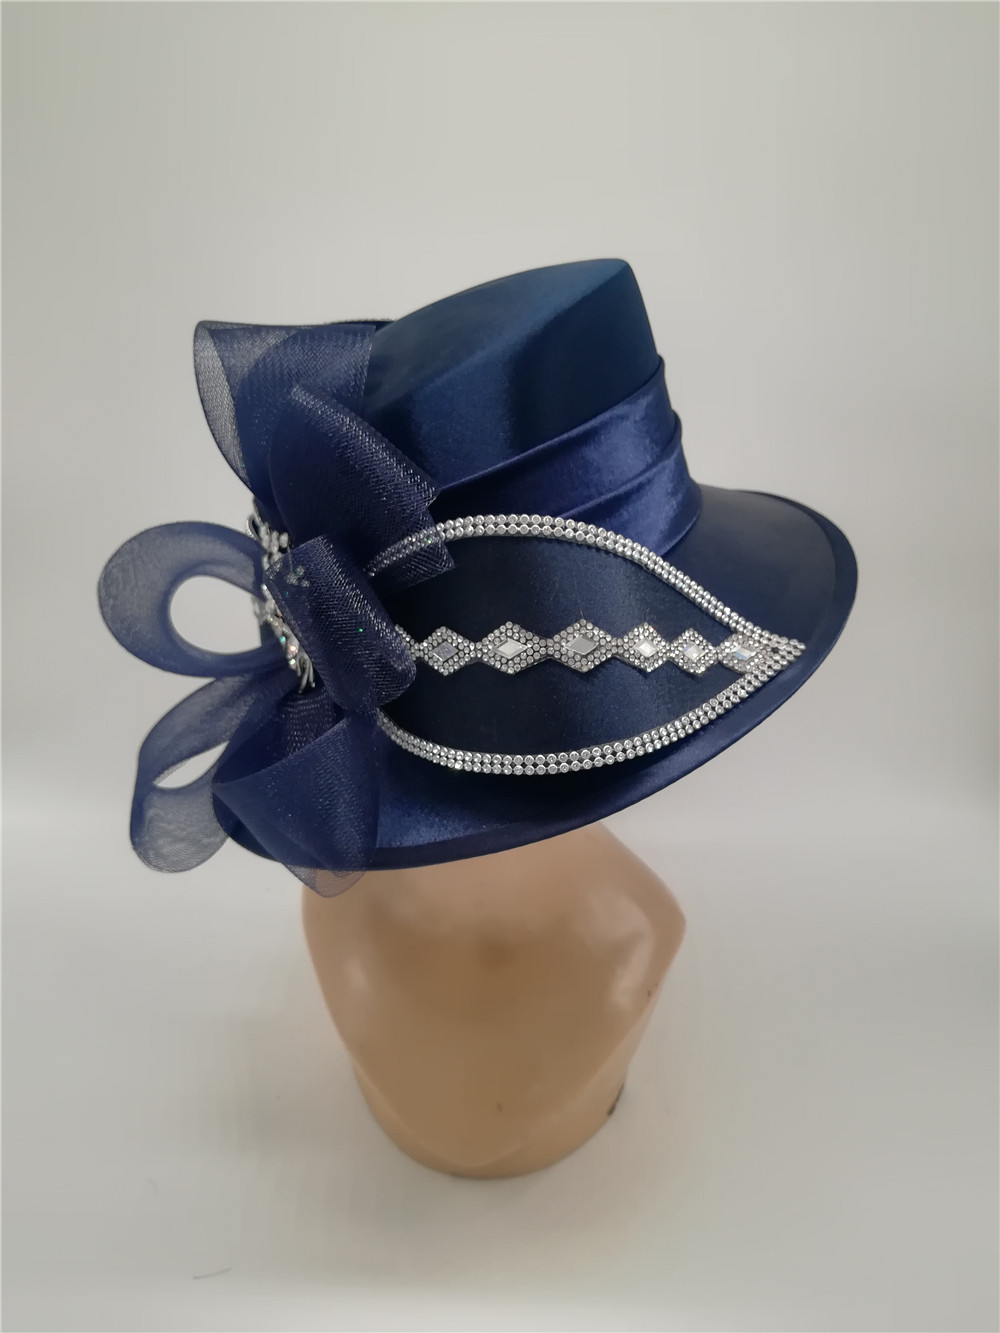 The Satin Felt Case-hardened Royal Magnificent Hot Sale Quality Summer Wide Brim Formal Party Lady Church New Elegant Women Hat